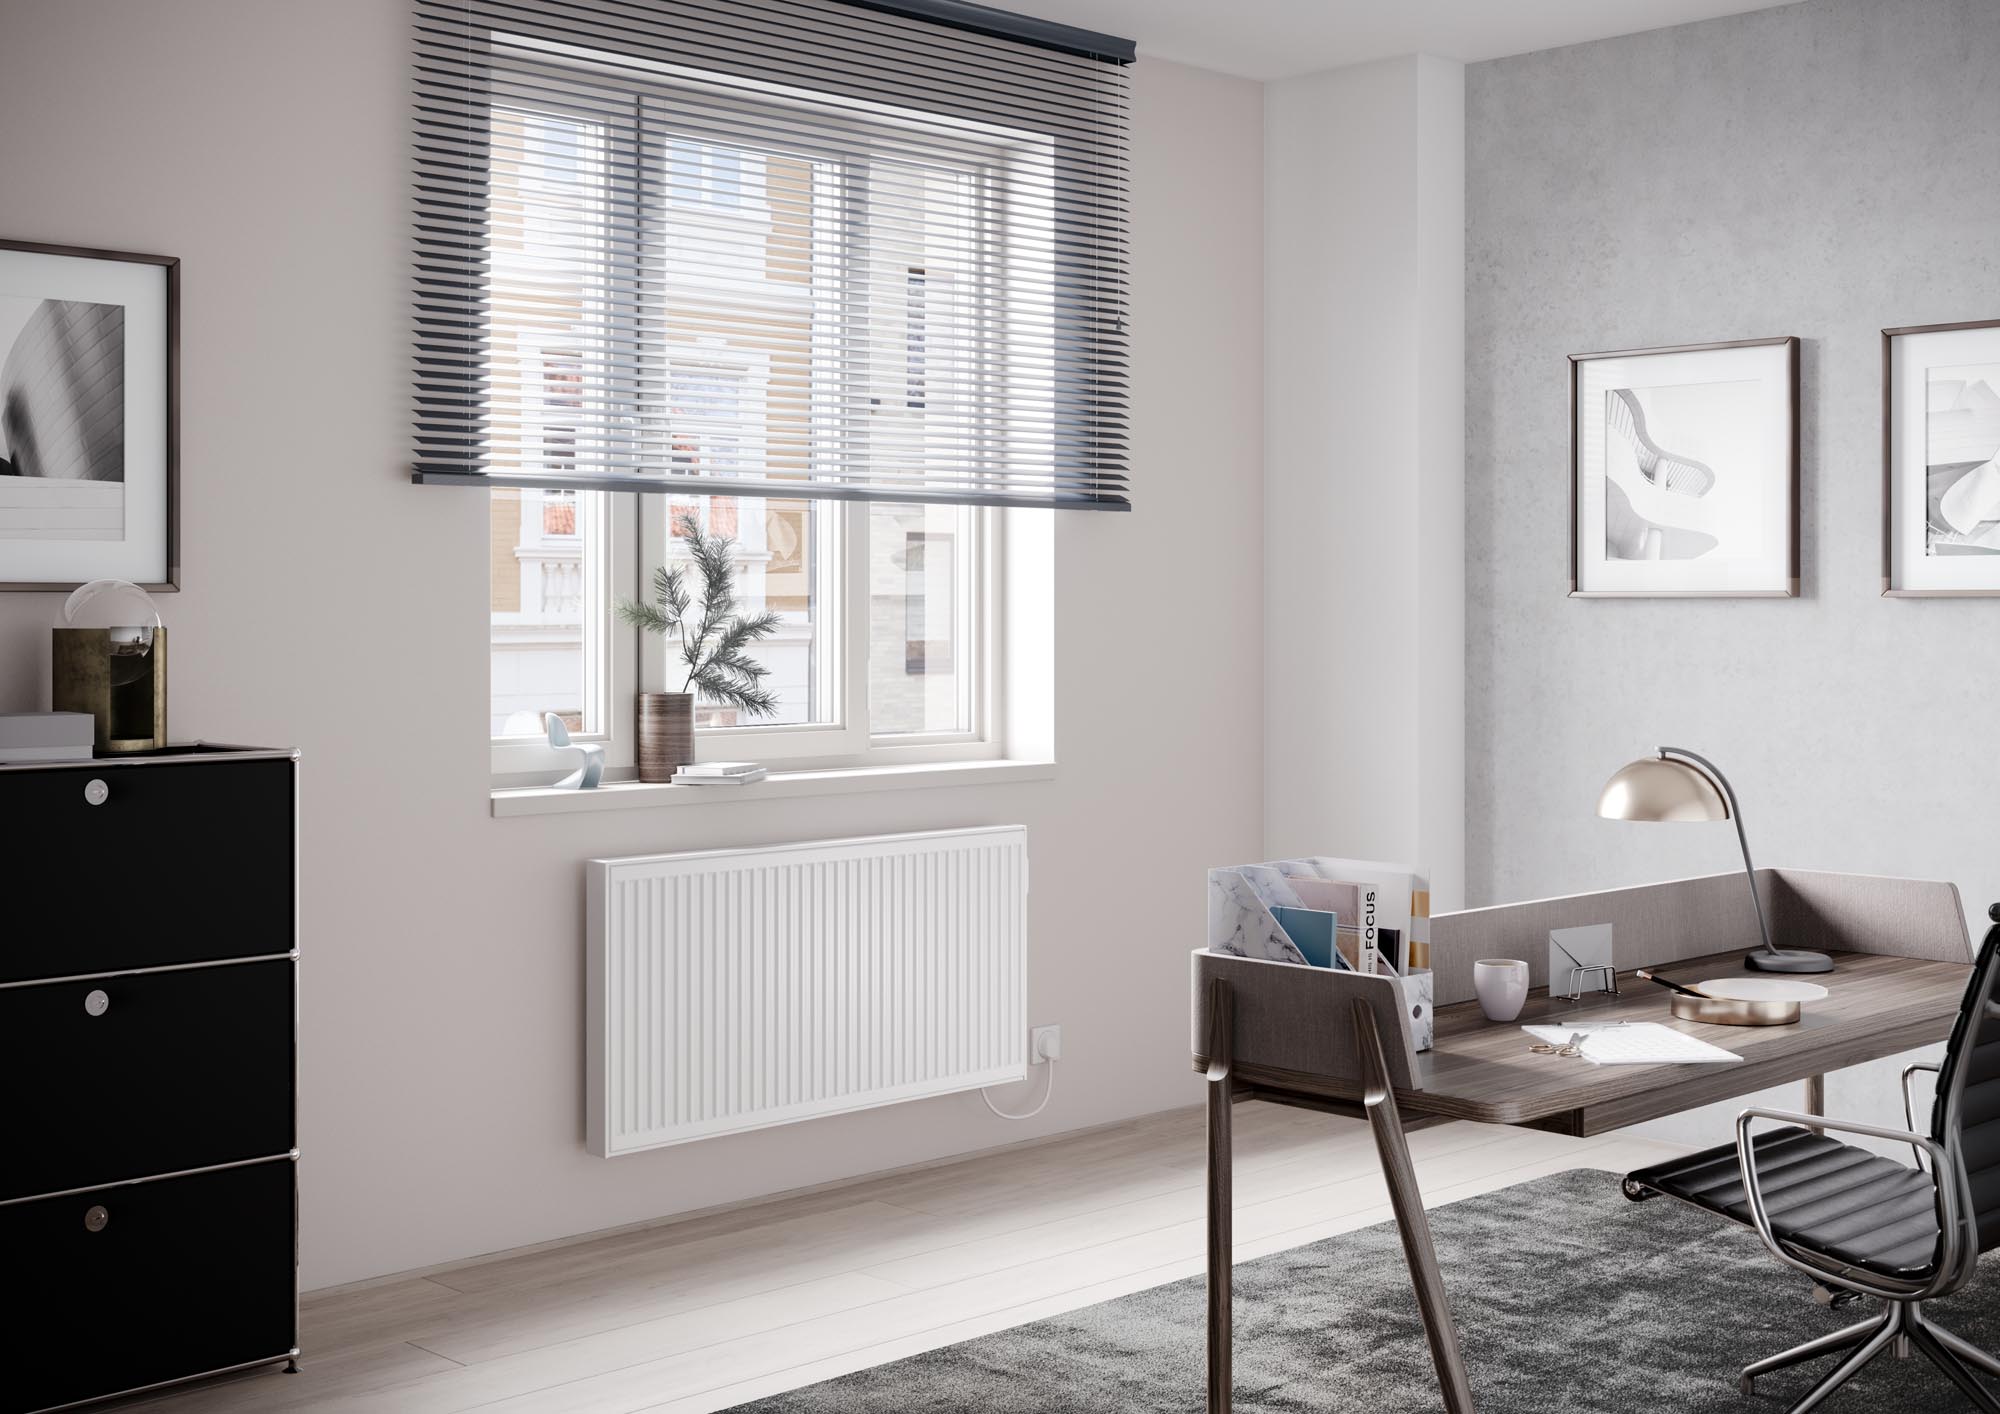 Kermi x-therm +e Profil horizontal electric steel panel radiators with a profiled surface look.